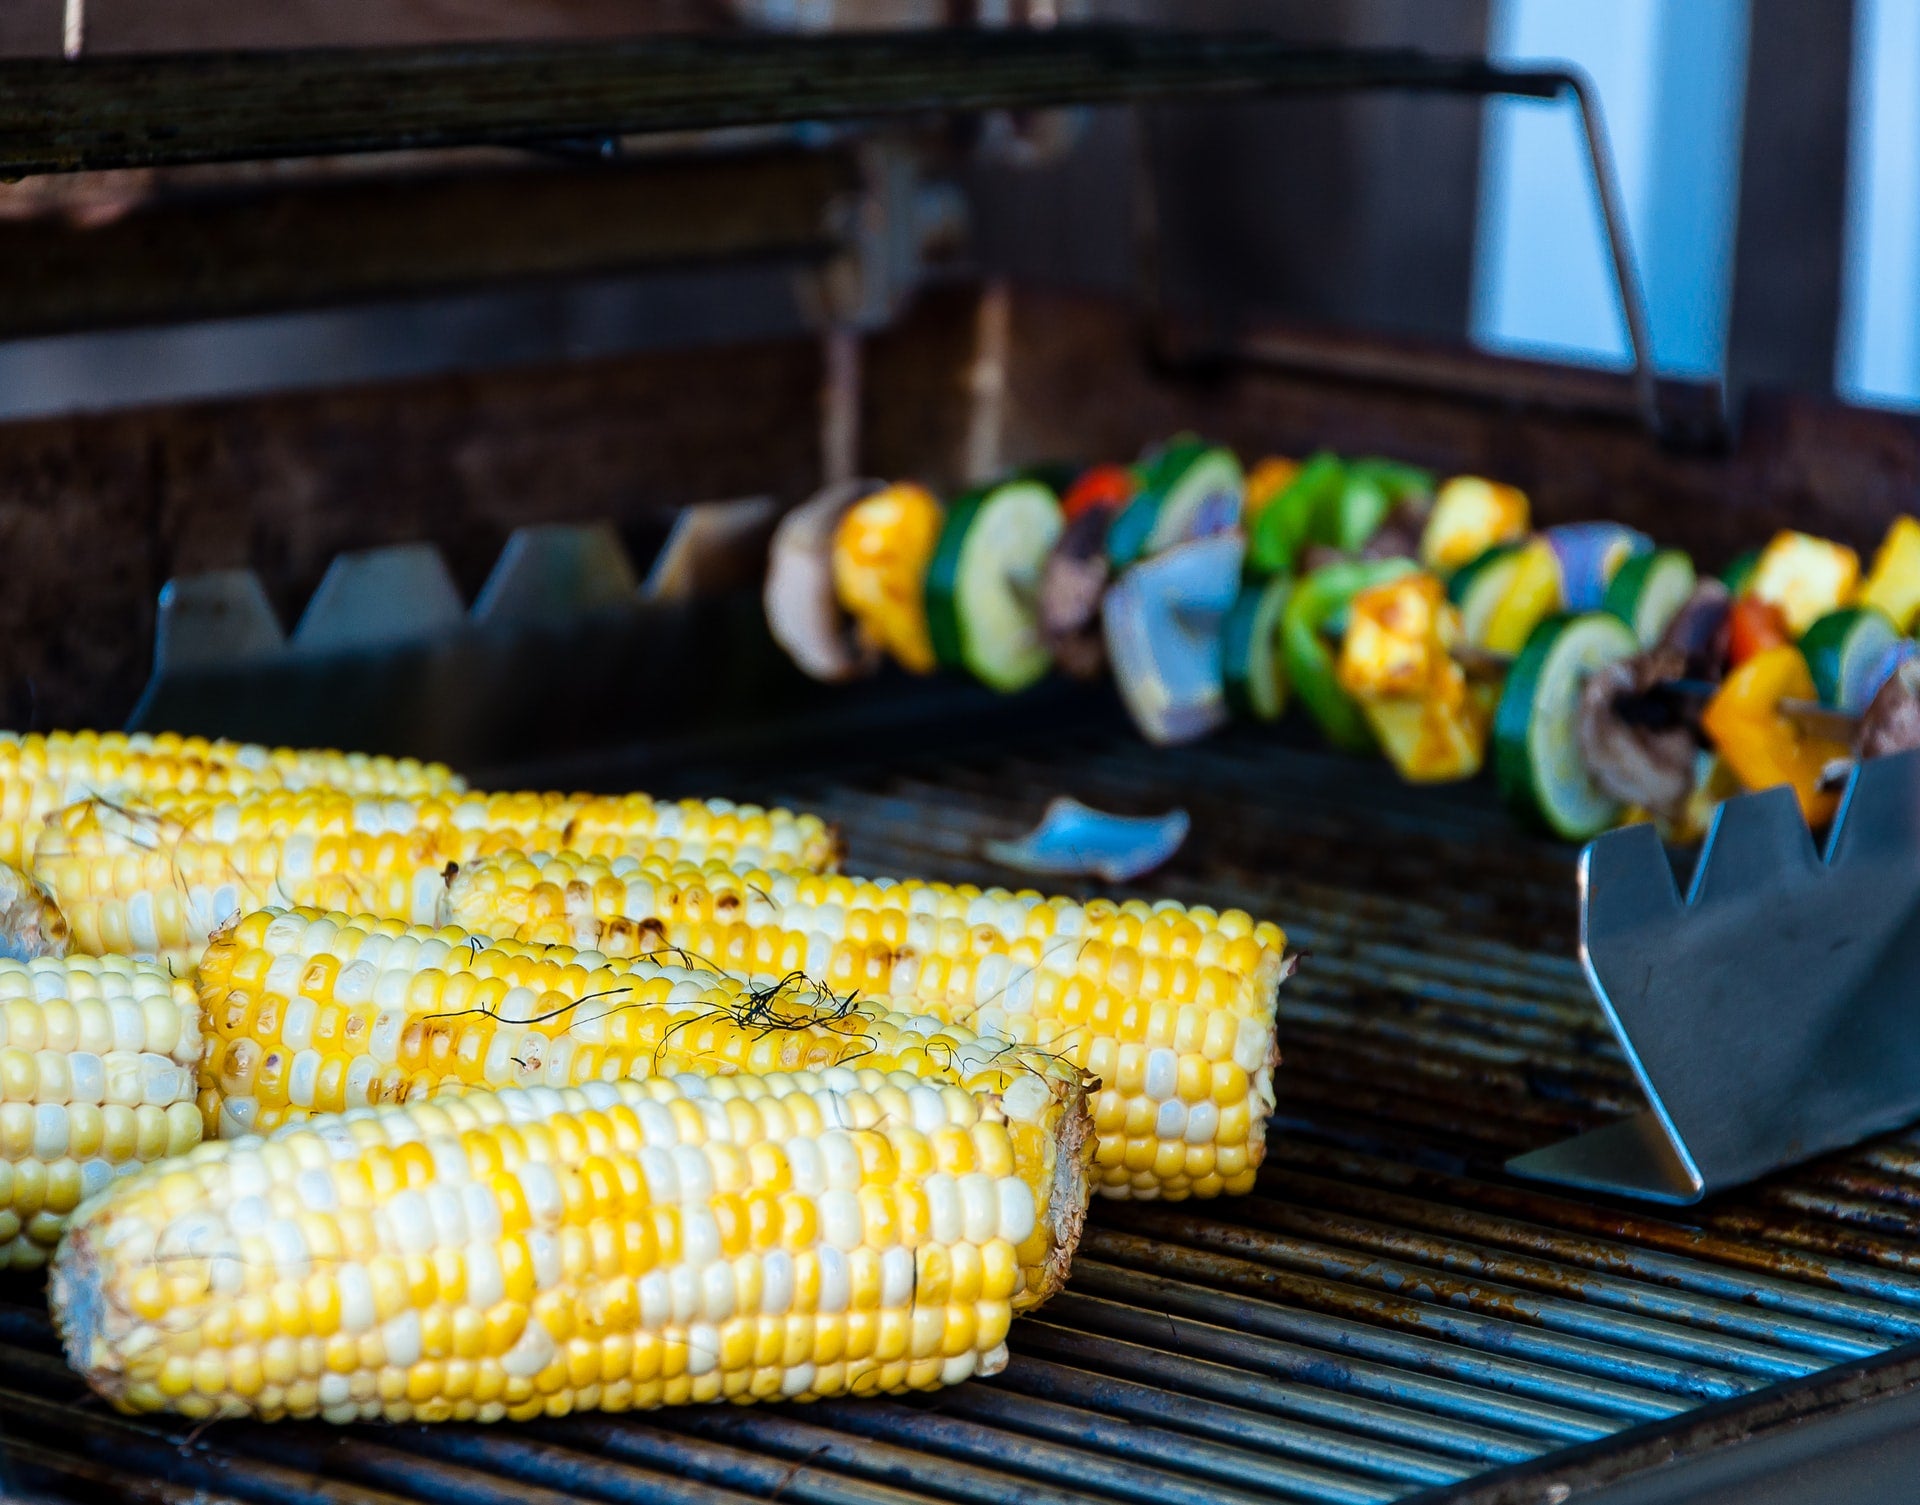 HOW TO MAINTAIN YOUR OUTDOOR GAS GRILL